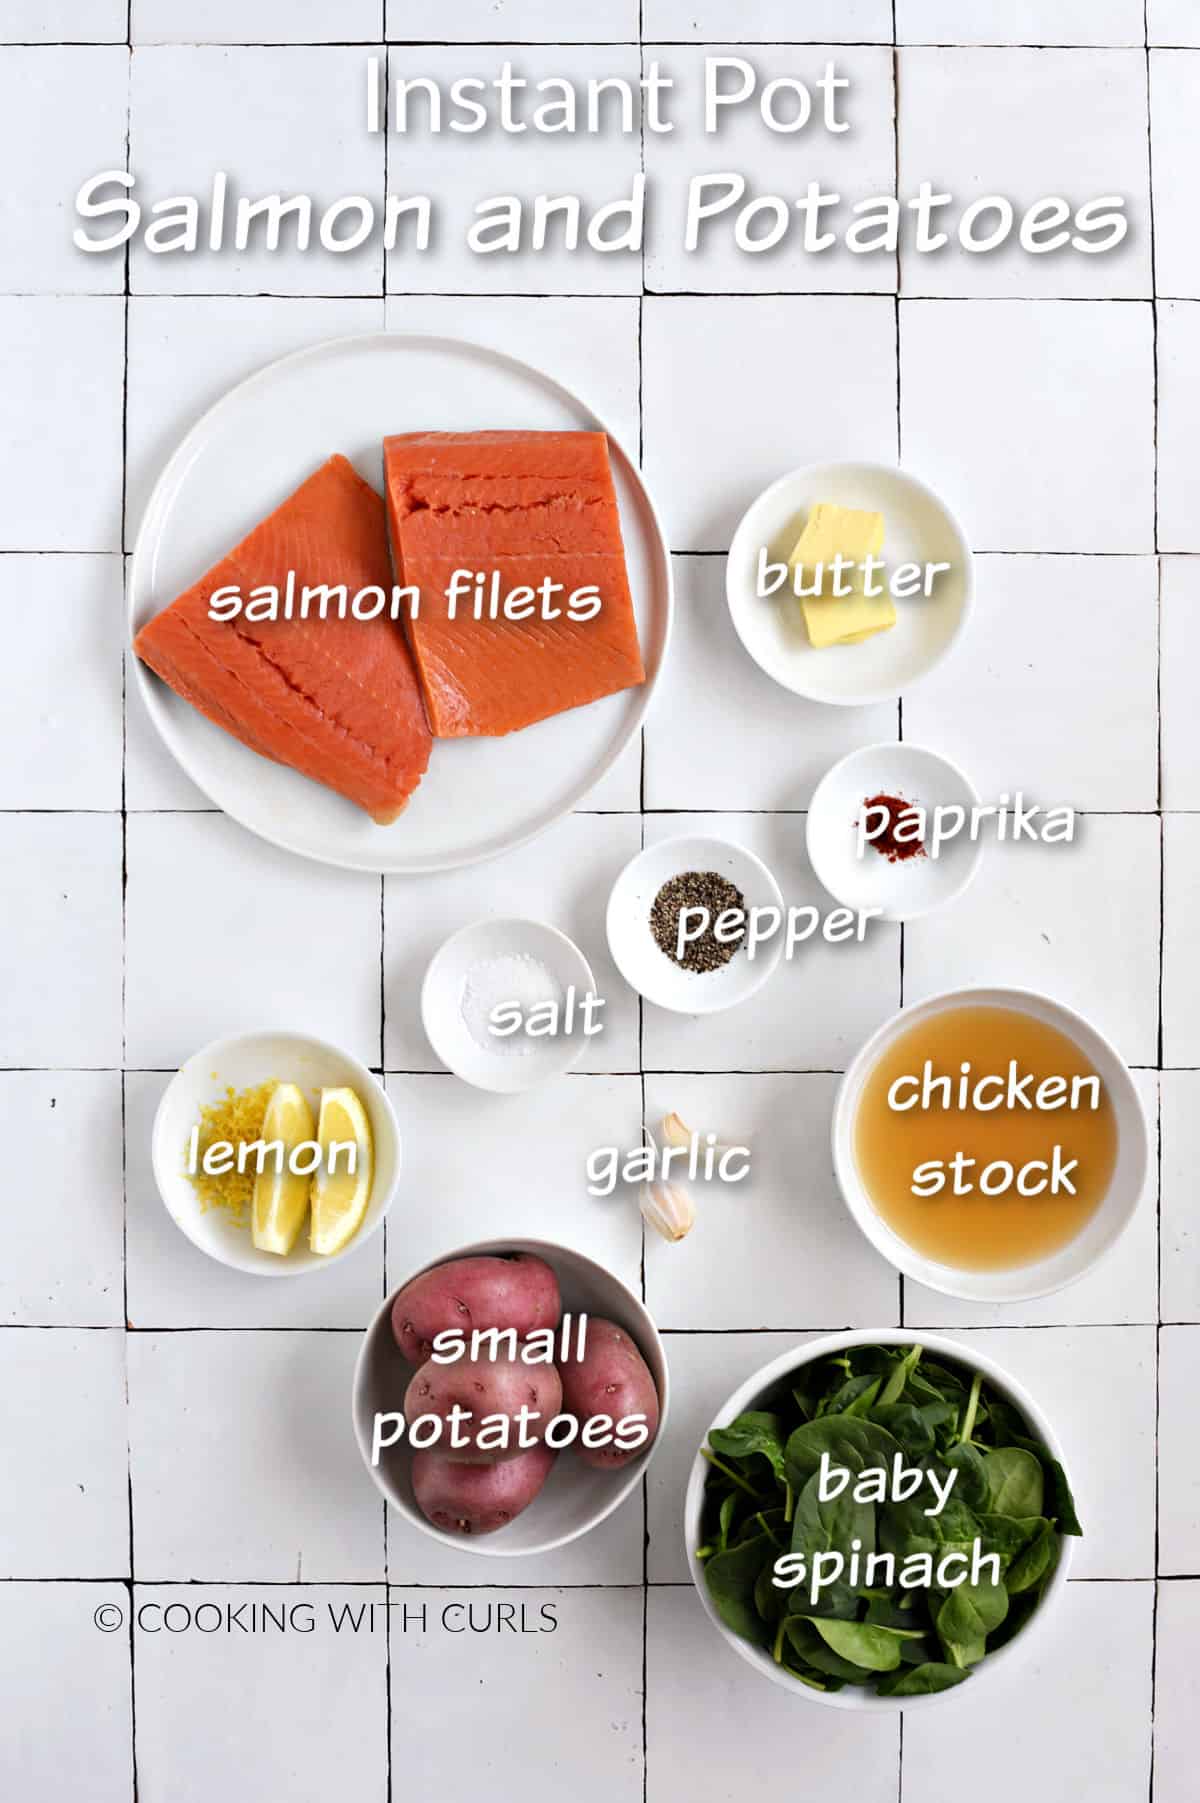 Instant Pot Salmon and Potatoes ingredients on a white tile background.